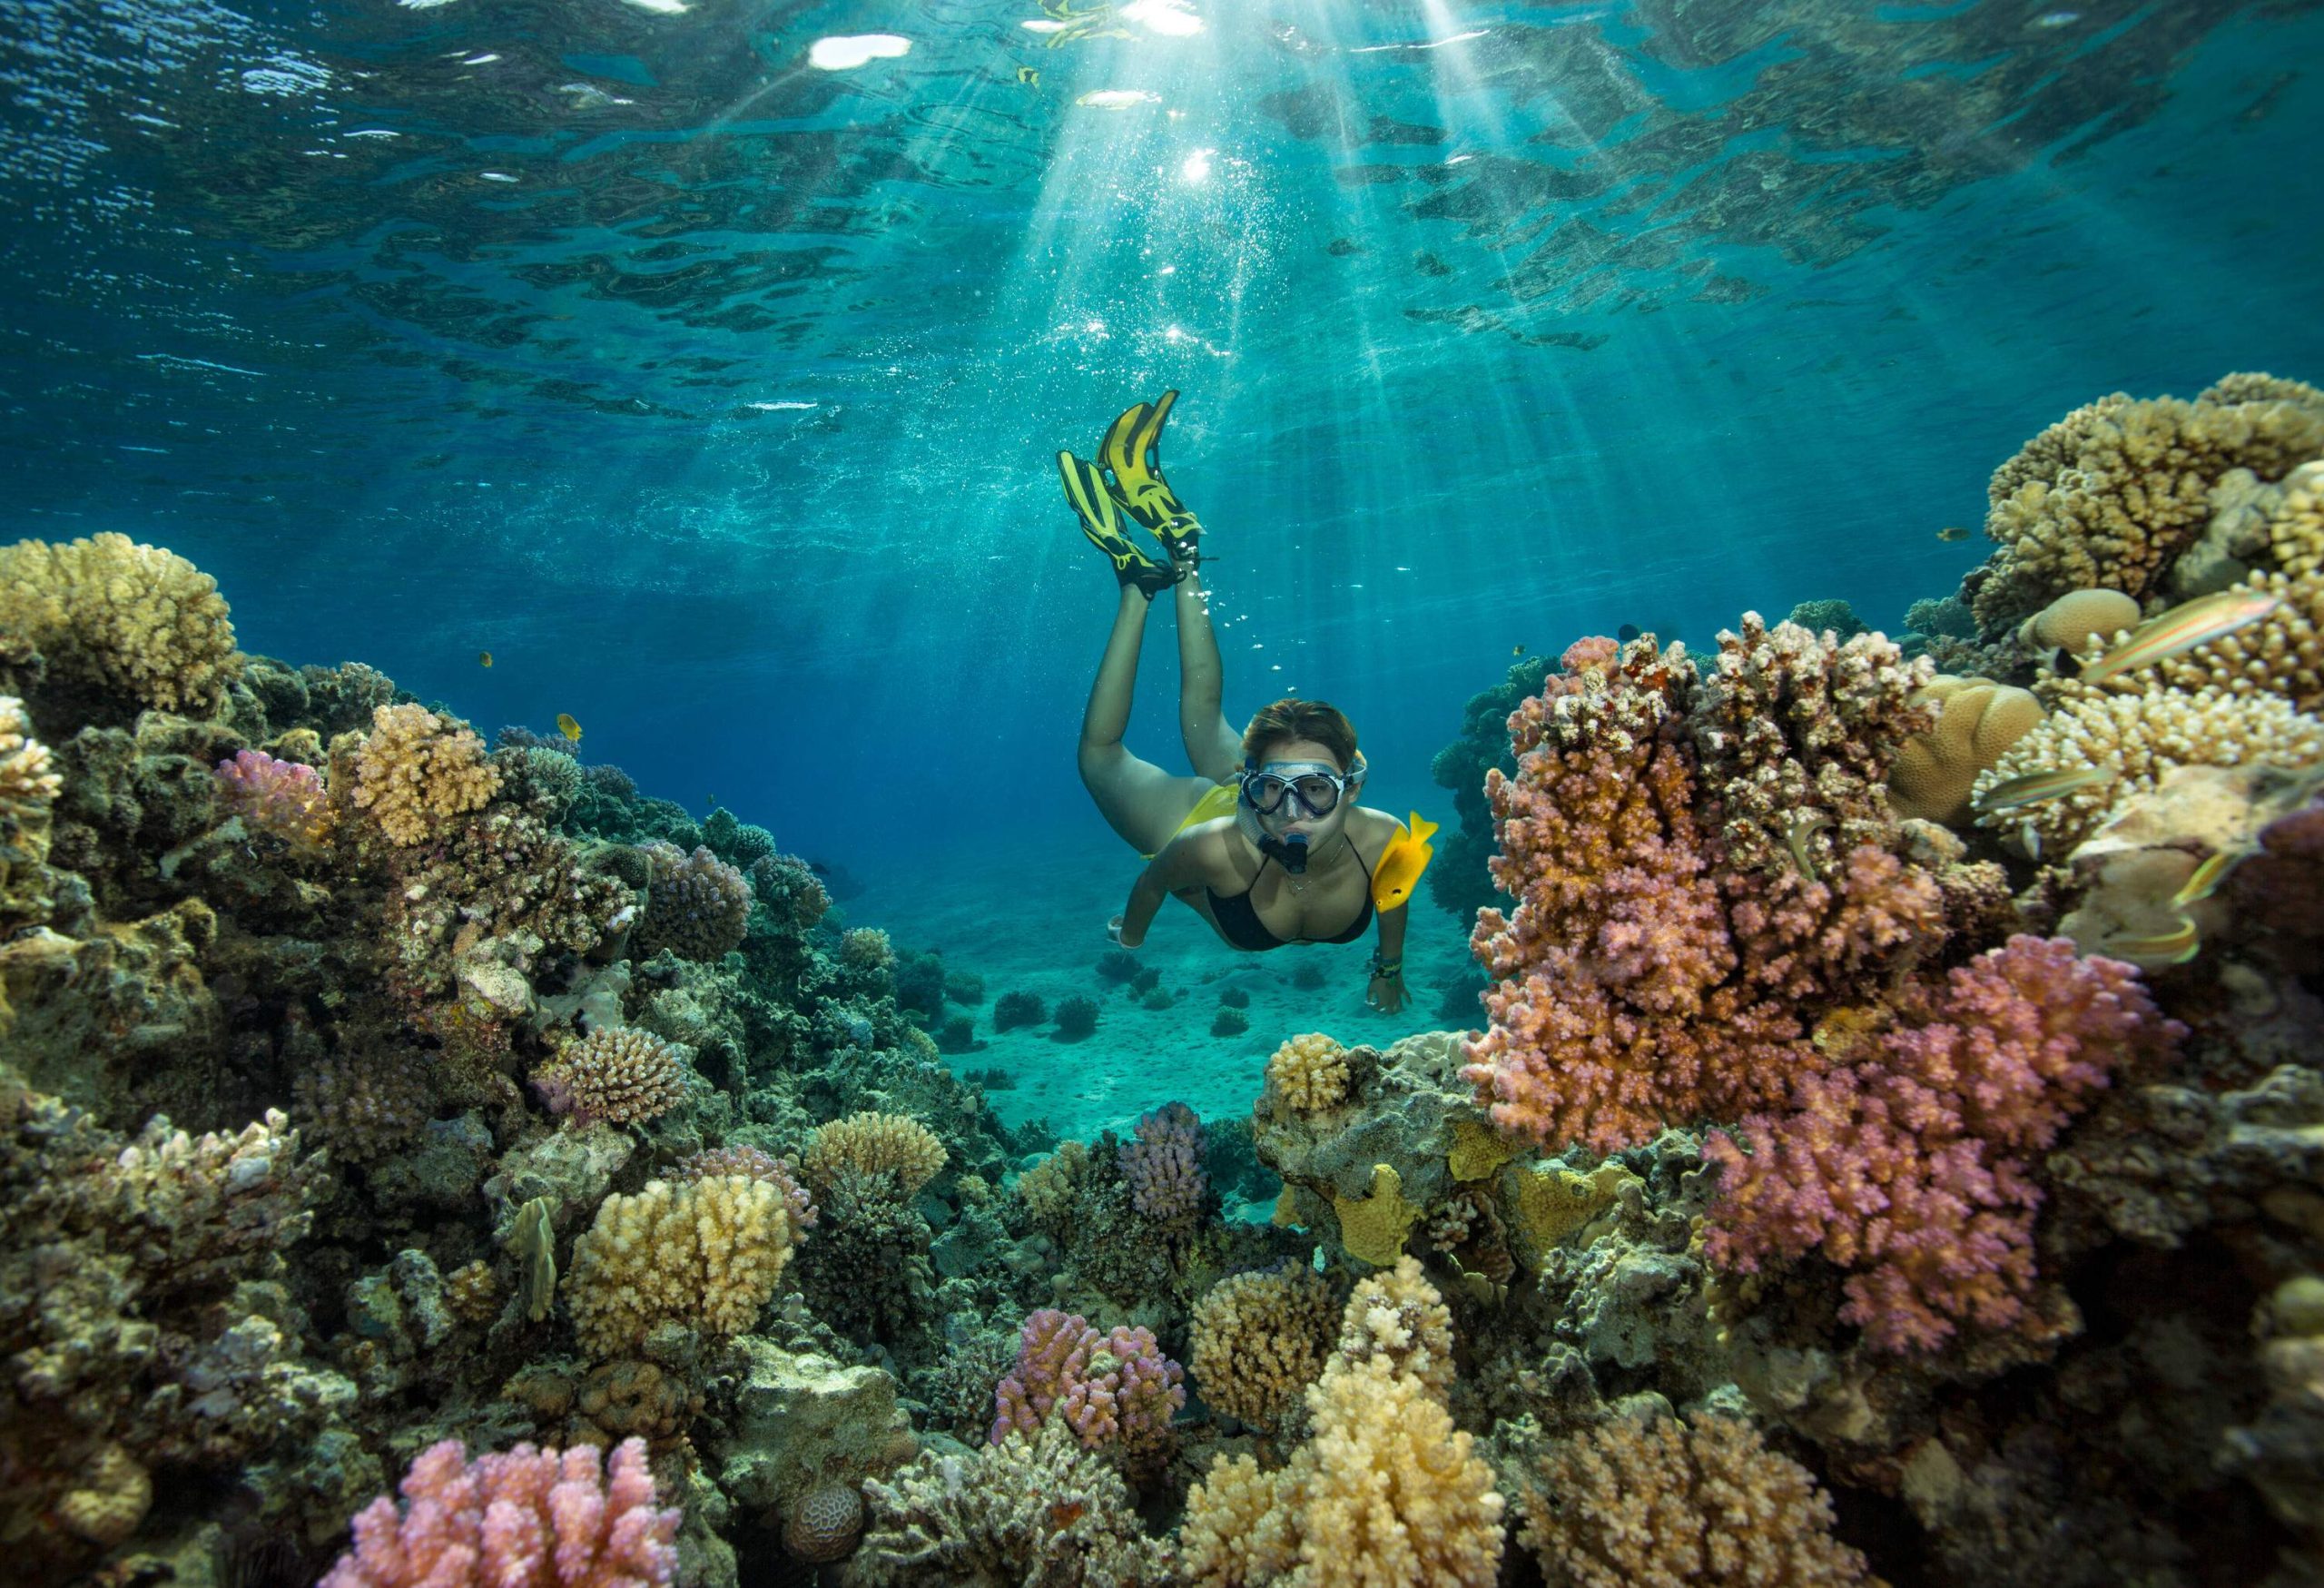 A woman in a bathing suit snorkels underwater amongst the colourful coral reefs as the sunlight glistens from the water's surface.